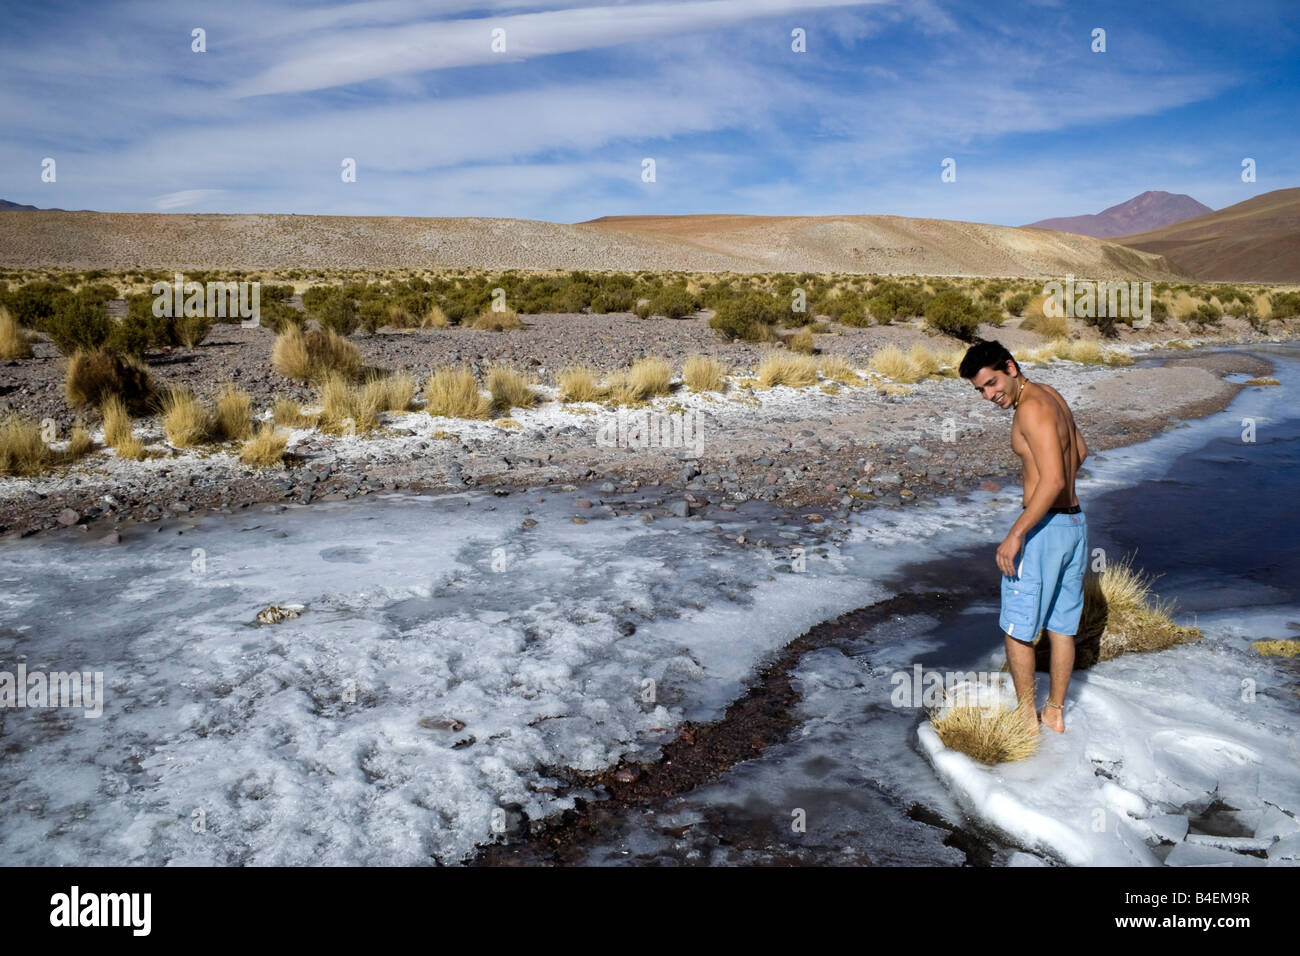 A backpacker tests the temperature of the water of a frozen stream at high altitude in the Andes in Southwest Bolivia Stock Photo